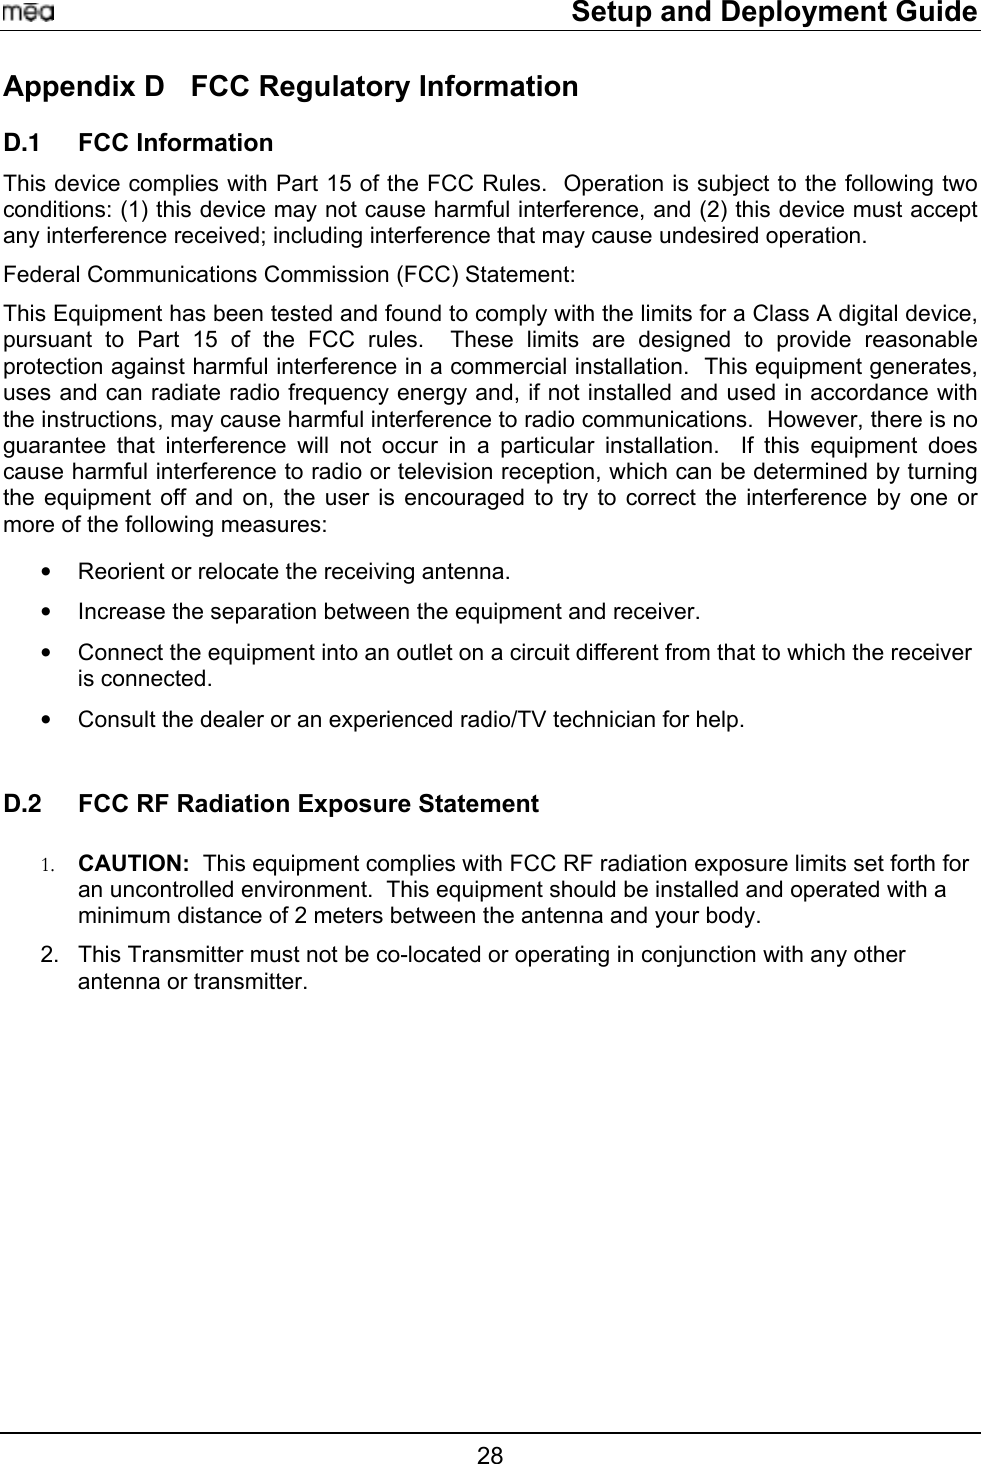     Setup and Deployment Guide Appendix D  FCC Regulatory Information FCC Information D.1 D.2 This device complies with Part 15 of the FCC Rules.  Operation is subject to the following two conditions: (1) this device may not cause harmful interference, and (2) this device must accept any interference received; including interference that may cause undesired operation. Federal Communications Commission (FCC) Statement: This Equipment has been tested and found to comply with the limits for a Class A digital device, pursuant to Part 15 of the FCC rules.  These limits are designed to provide reasonable protection against harmful interference in a commercial installation.  This equipment generates, uses and can radiate radio frequency energy and, if not installed and used in accordance with the instructions, may cause harmful interference to radio communications.  However, there is no guarantee that interference will not occur in a particular installation.  If this equipment does cause harmful interference to radio or television reception, which can be determined by turning the equipment off and on, the user is encouraged to try to correct the interference by one or more of the following measures:   •  Reorient or relocate the receiving antenna. •  Increase the separation between the equipment and receiver. •  Connect the equipment into an outlet on a circuit different from that to which the receiver is connected.  •  Consult the dealer or an experienced radio/TV technician for help.  FCC RF Radiation Exposure Statement  1.  CAUTION:  This equipment complies with FCC RF radiation exposure limits set forth for an uncontrolled environment.  This equipment should be installed and operated with a minimum distance of 2 meters between the antenna and your body. 2.  This Transmitter must not be co-located or operating in conjunction with any other antenna or transmitter. 7 28 